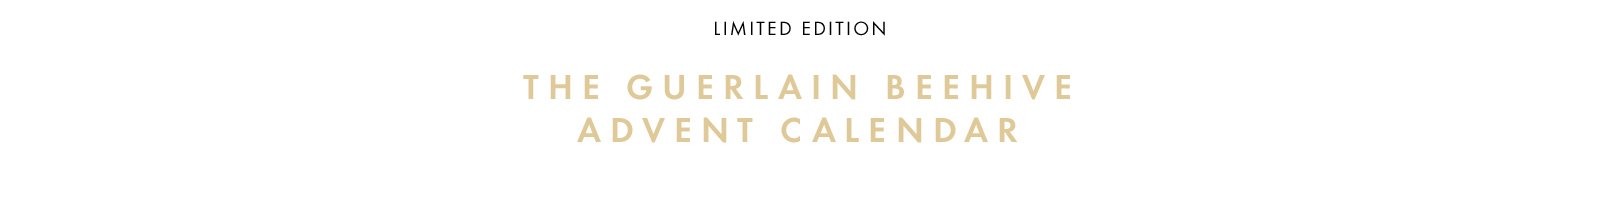 Guerlain: Online Exclusive: Limited Edition Advent Calendar Milled